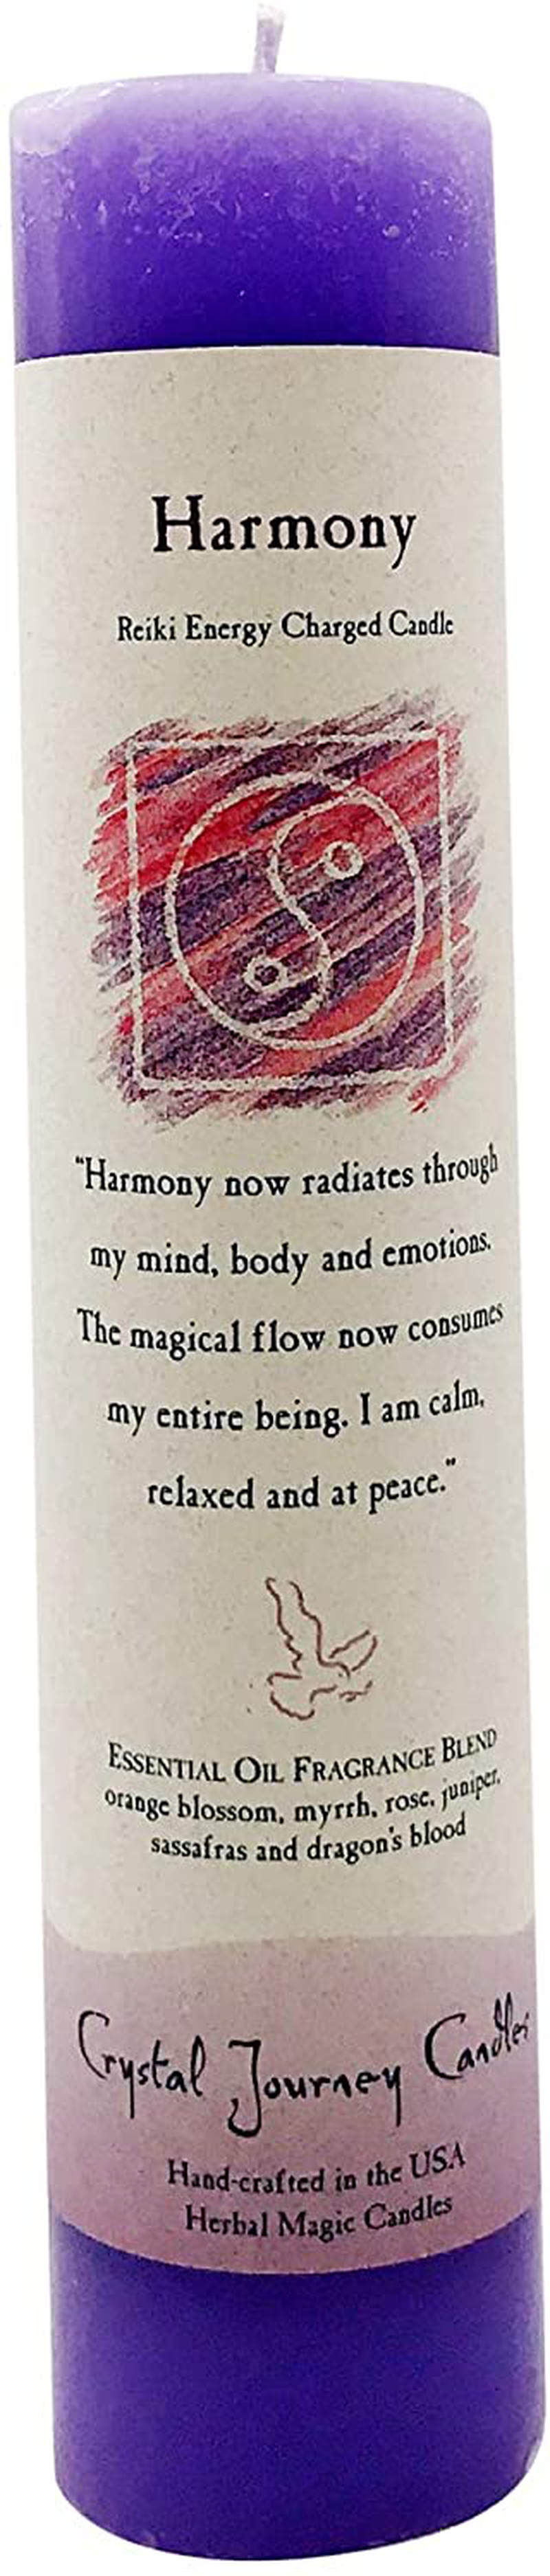 Crystal Journey, Candle Pillar Angels Influence, 1 Count Home & Garden > Decor > Home Fragrances > Candles Crystal Journey Harmony  